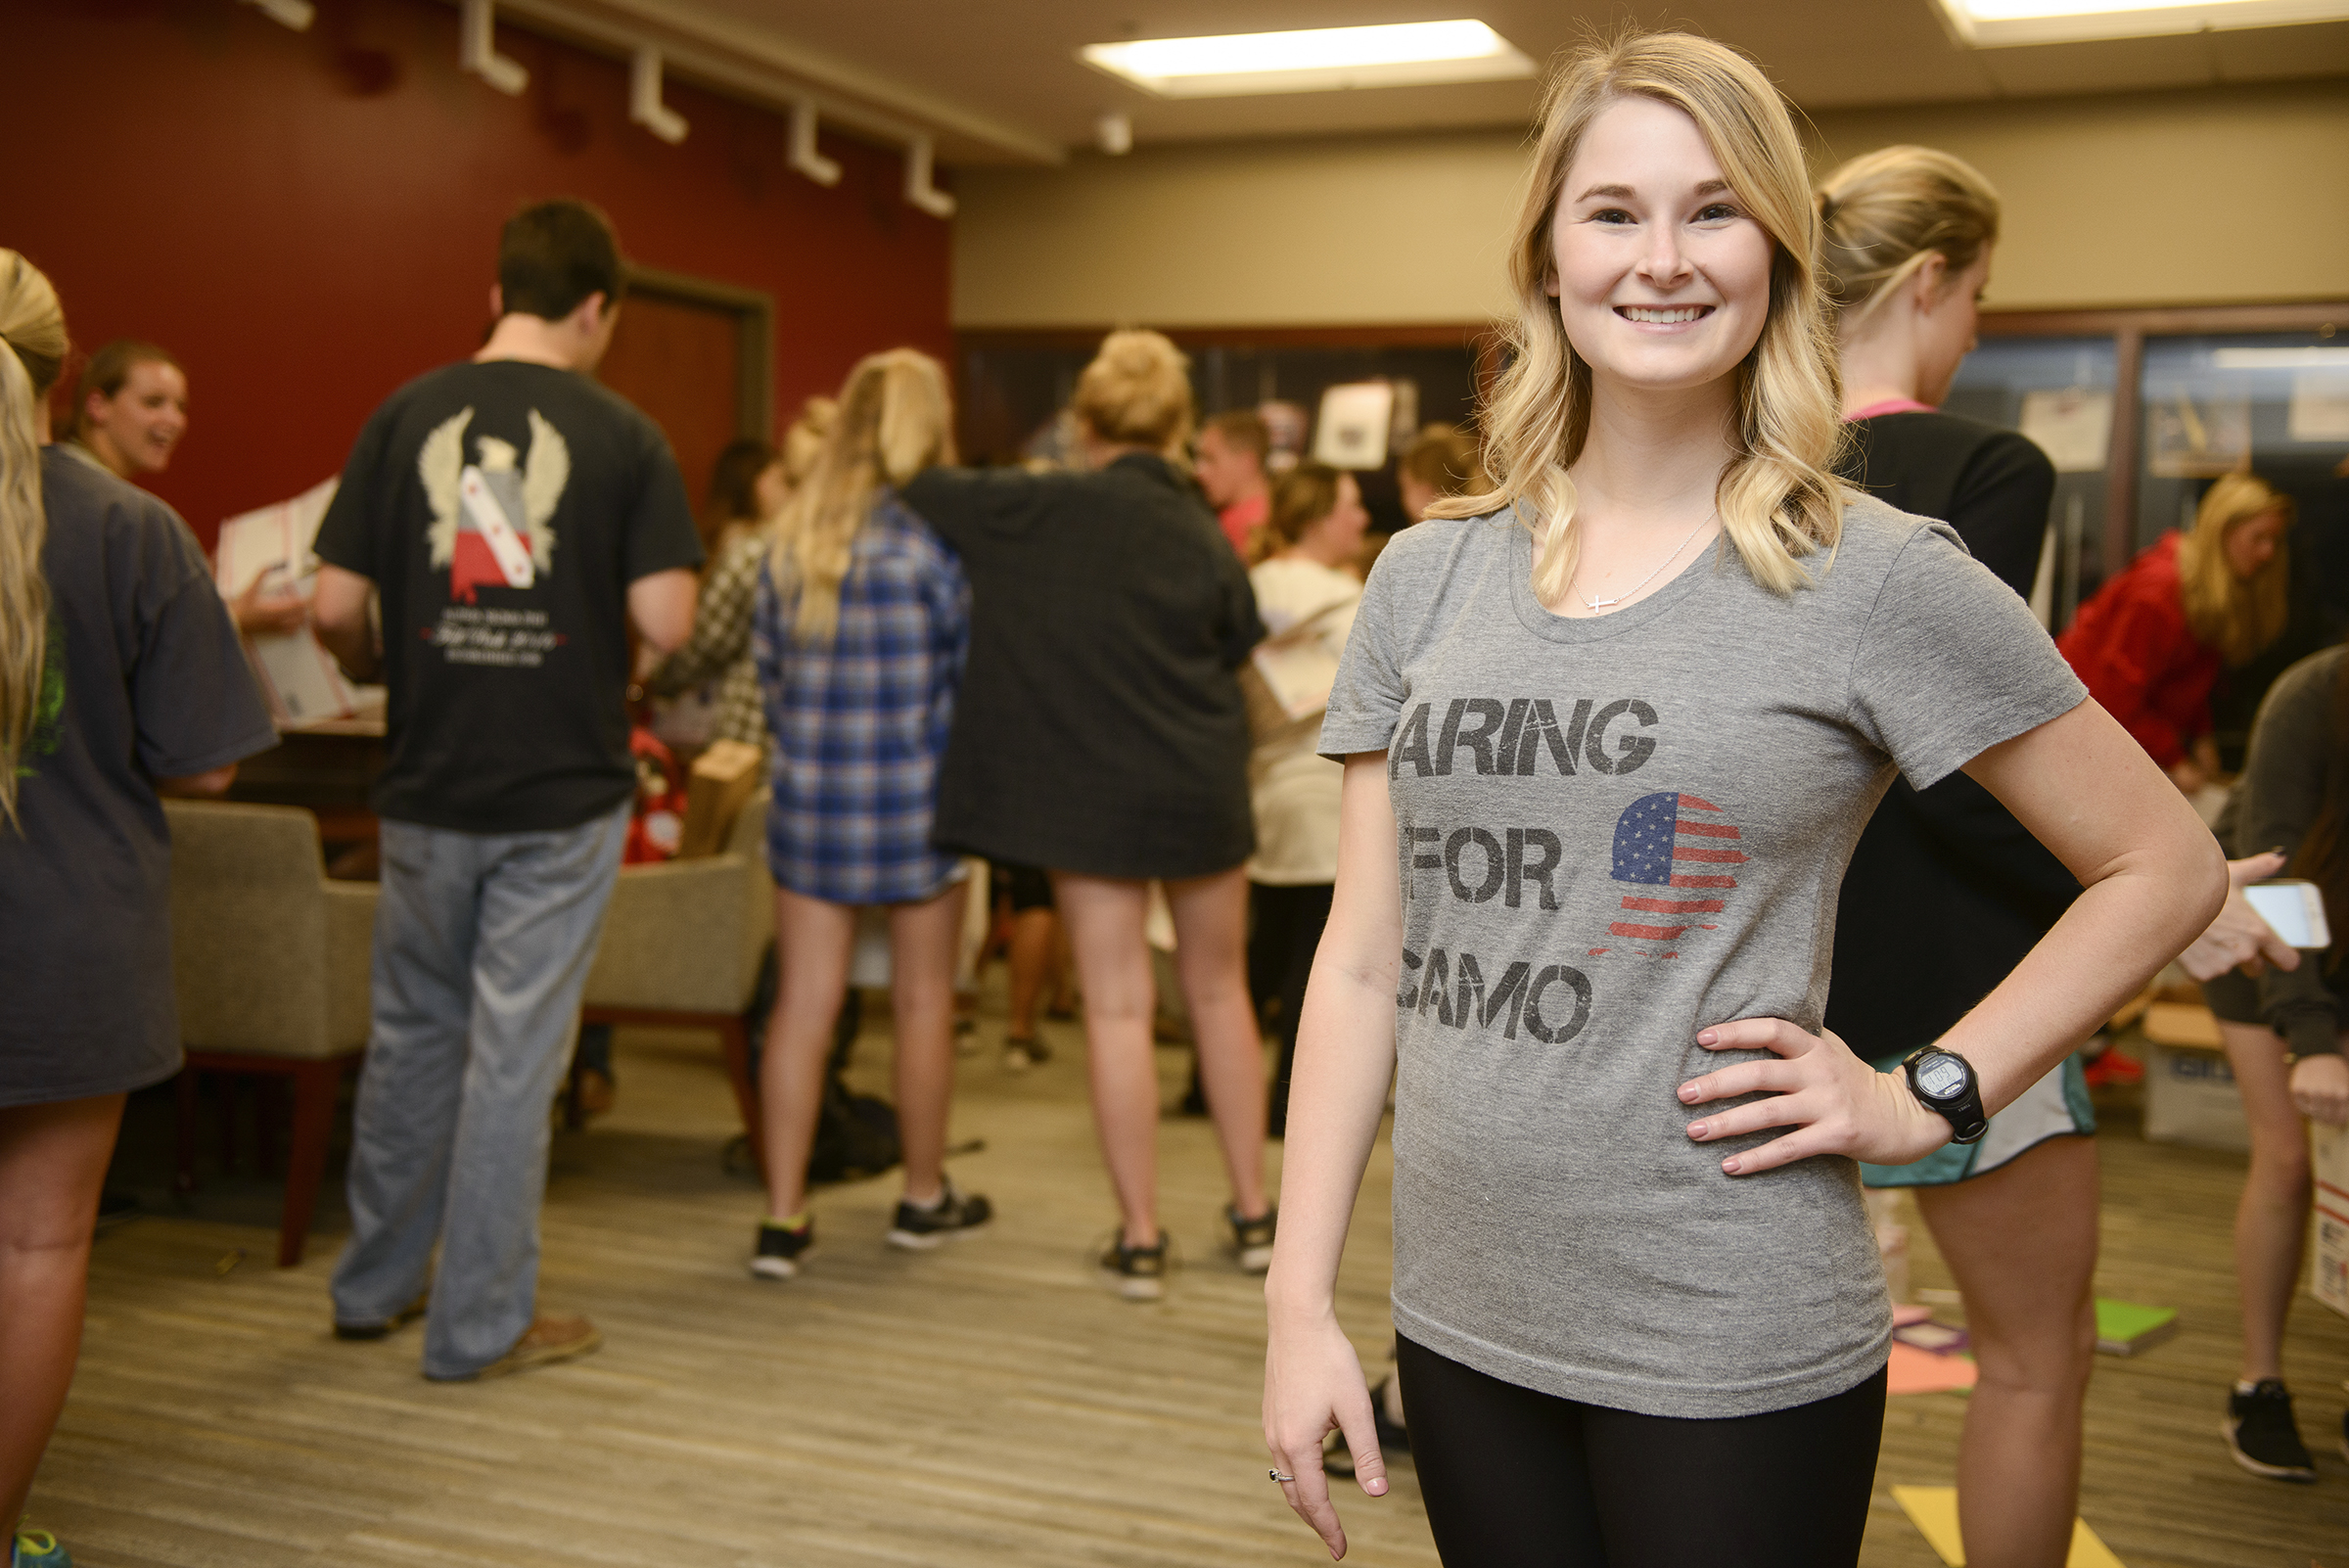 Caring for Camo: UA Community Rallies for Care-Package Drive